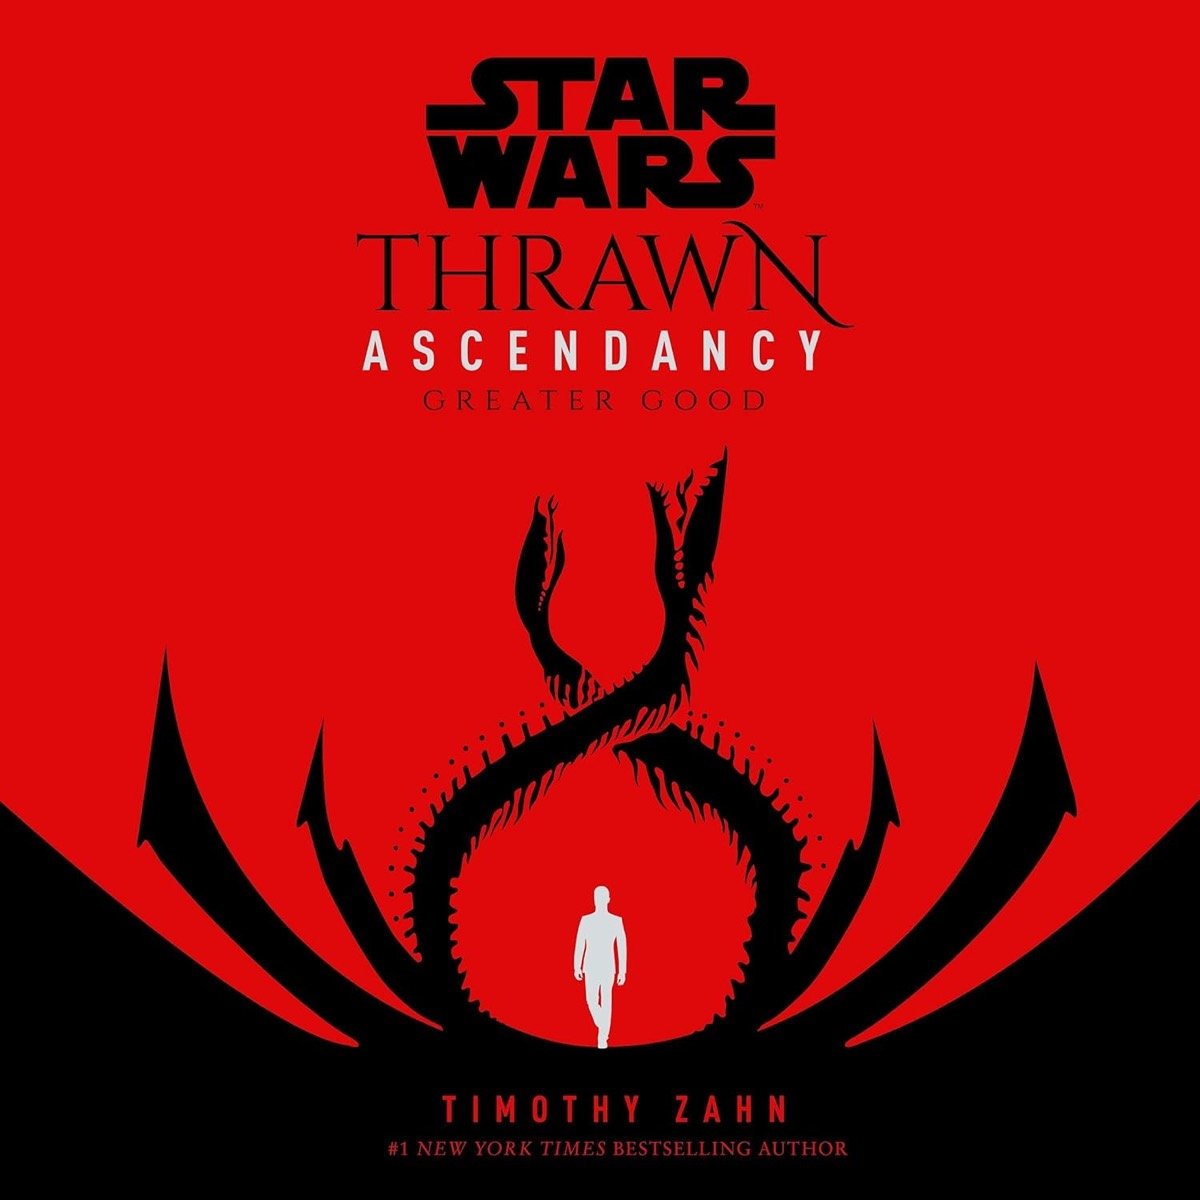 Cover art for Star Wars- Thrawn Ascendancy Greater Good featuring Thrawn walking through an archway 